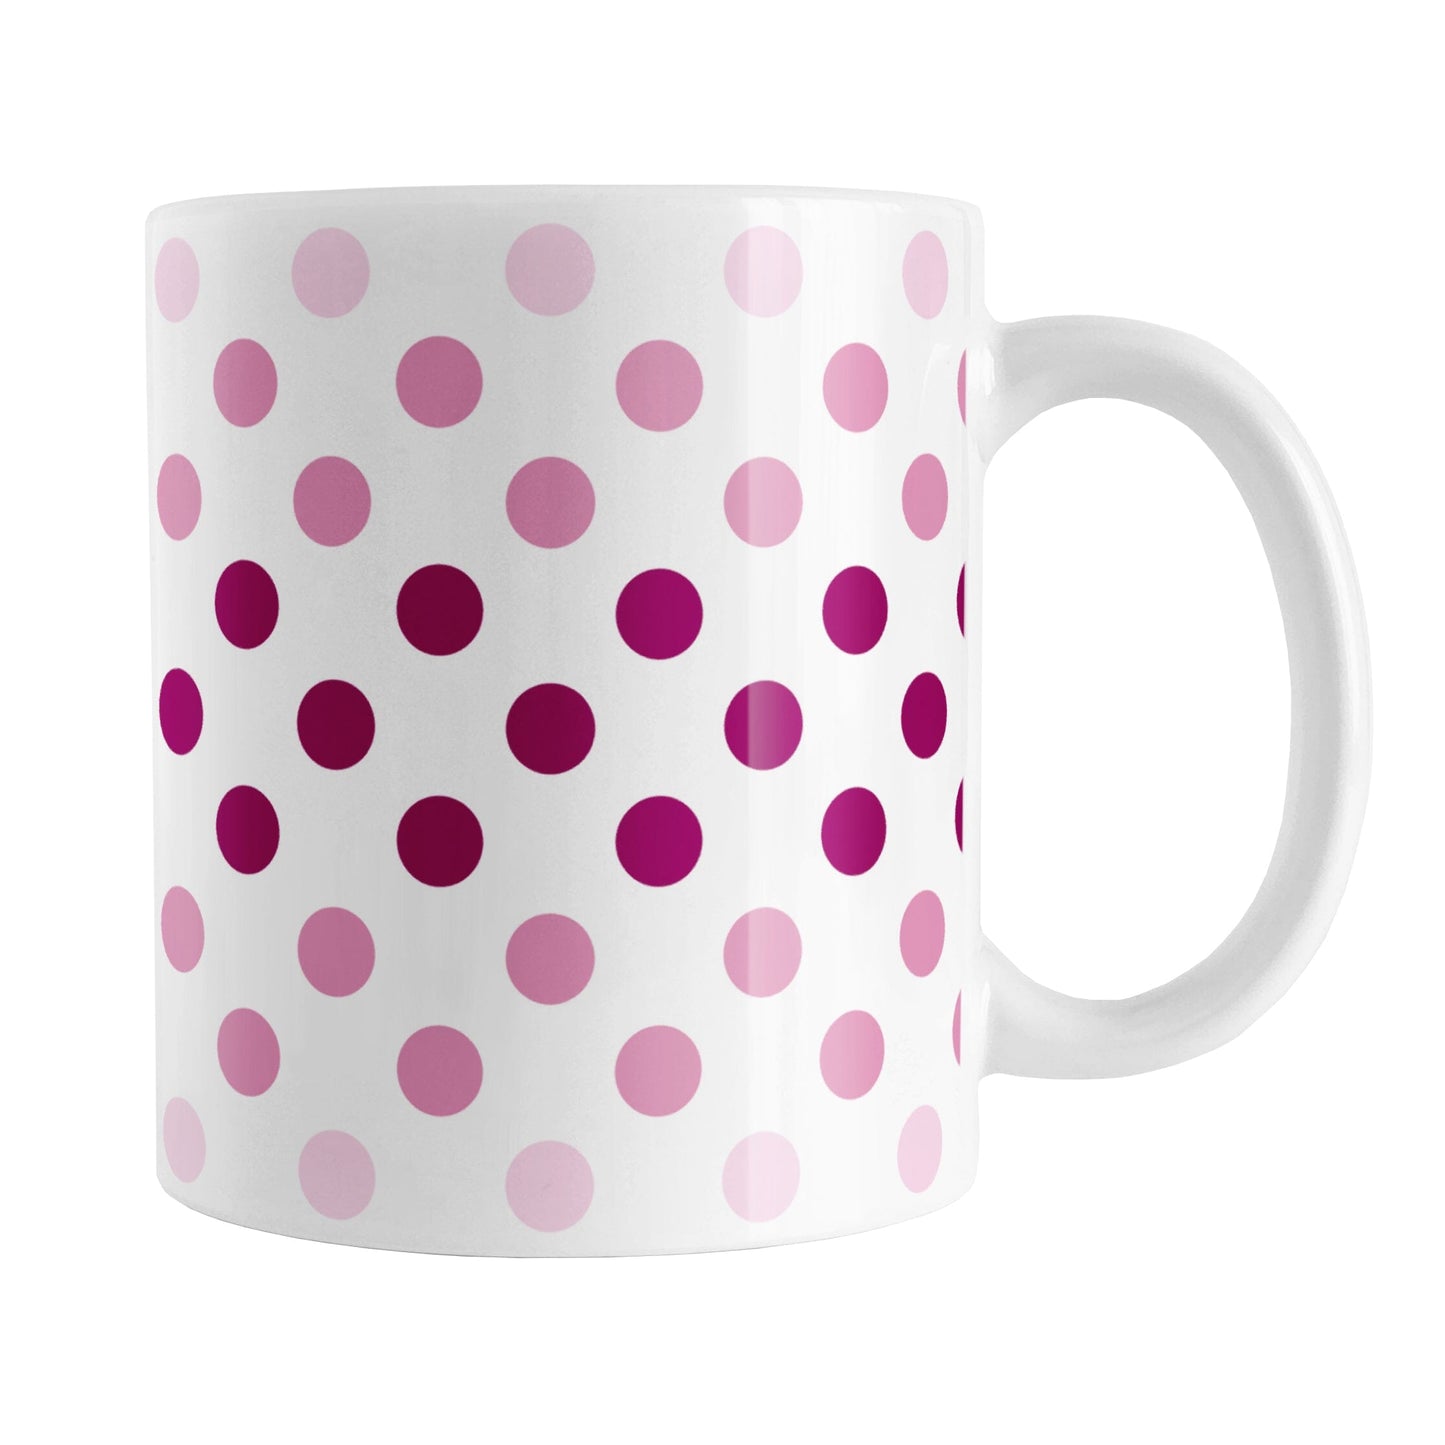 Polka Dots in Pink Mug (11oz) at Amy's Coffee Mugs. A ceramic coffee mug designed with polka dots in different shades of pink, with the darker pink color across the middle and the lighter pink along the top and bottom, in a pattern that wraps around the mug to the handle. 